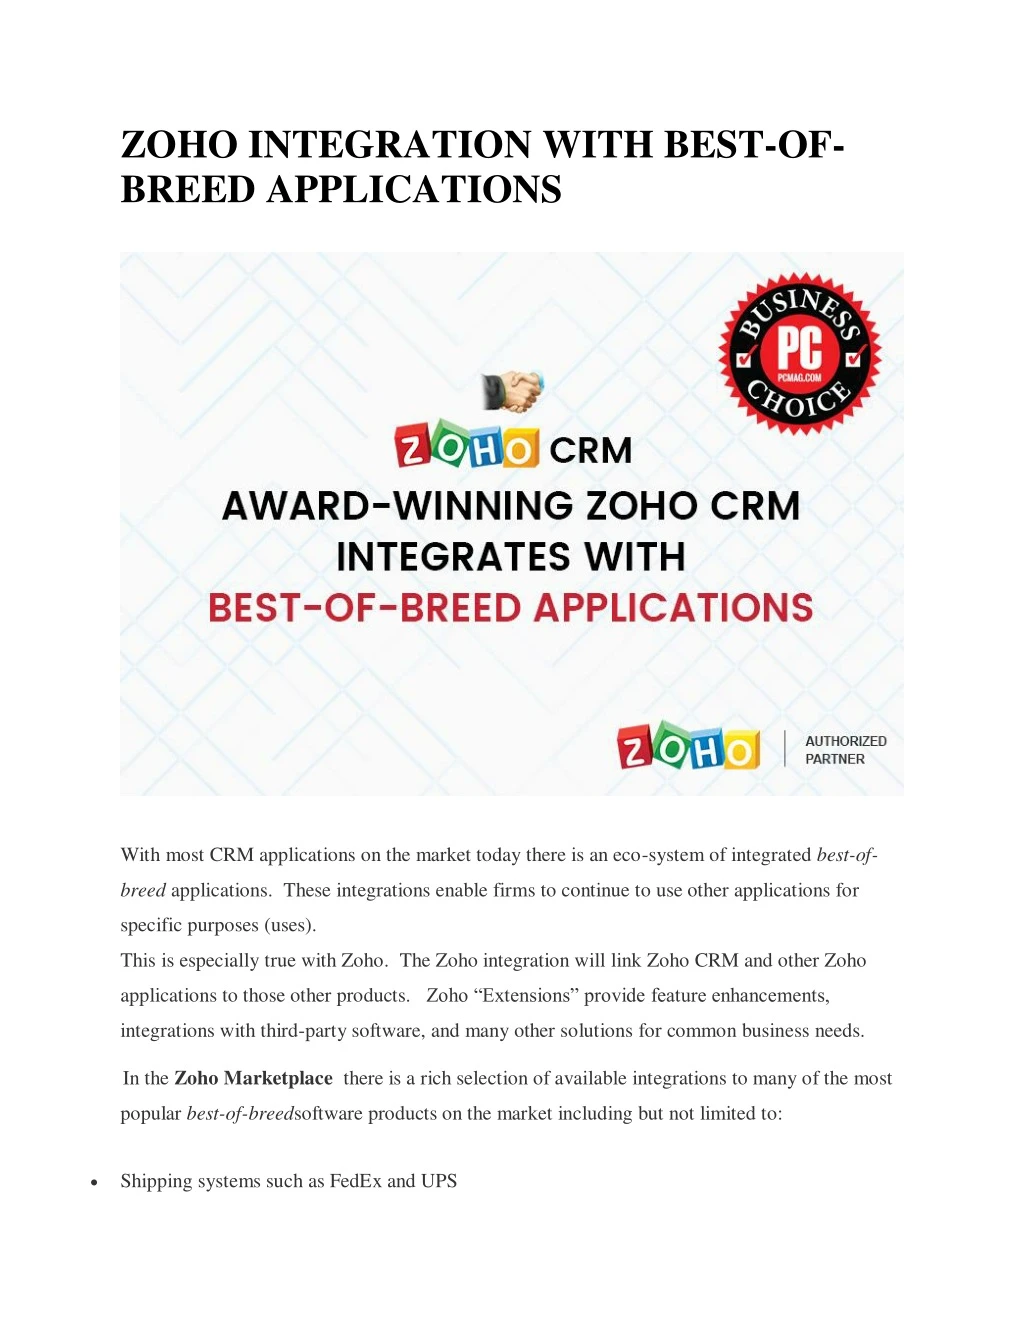 zoho integration with best of breed applications